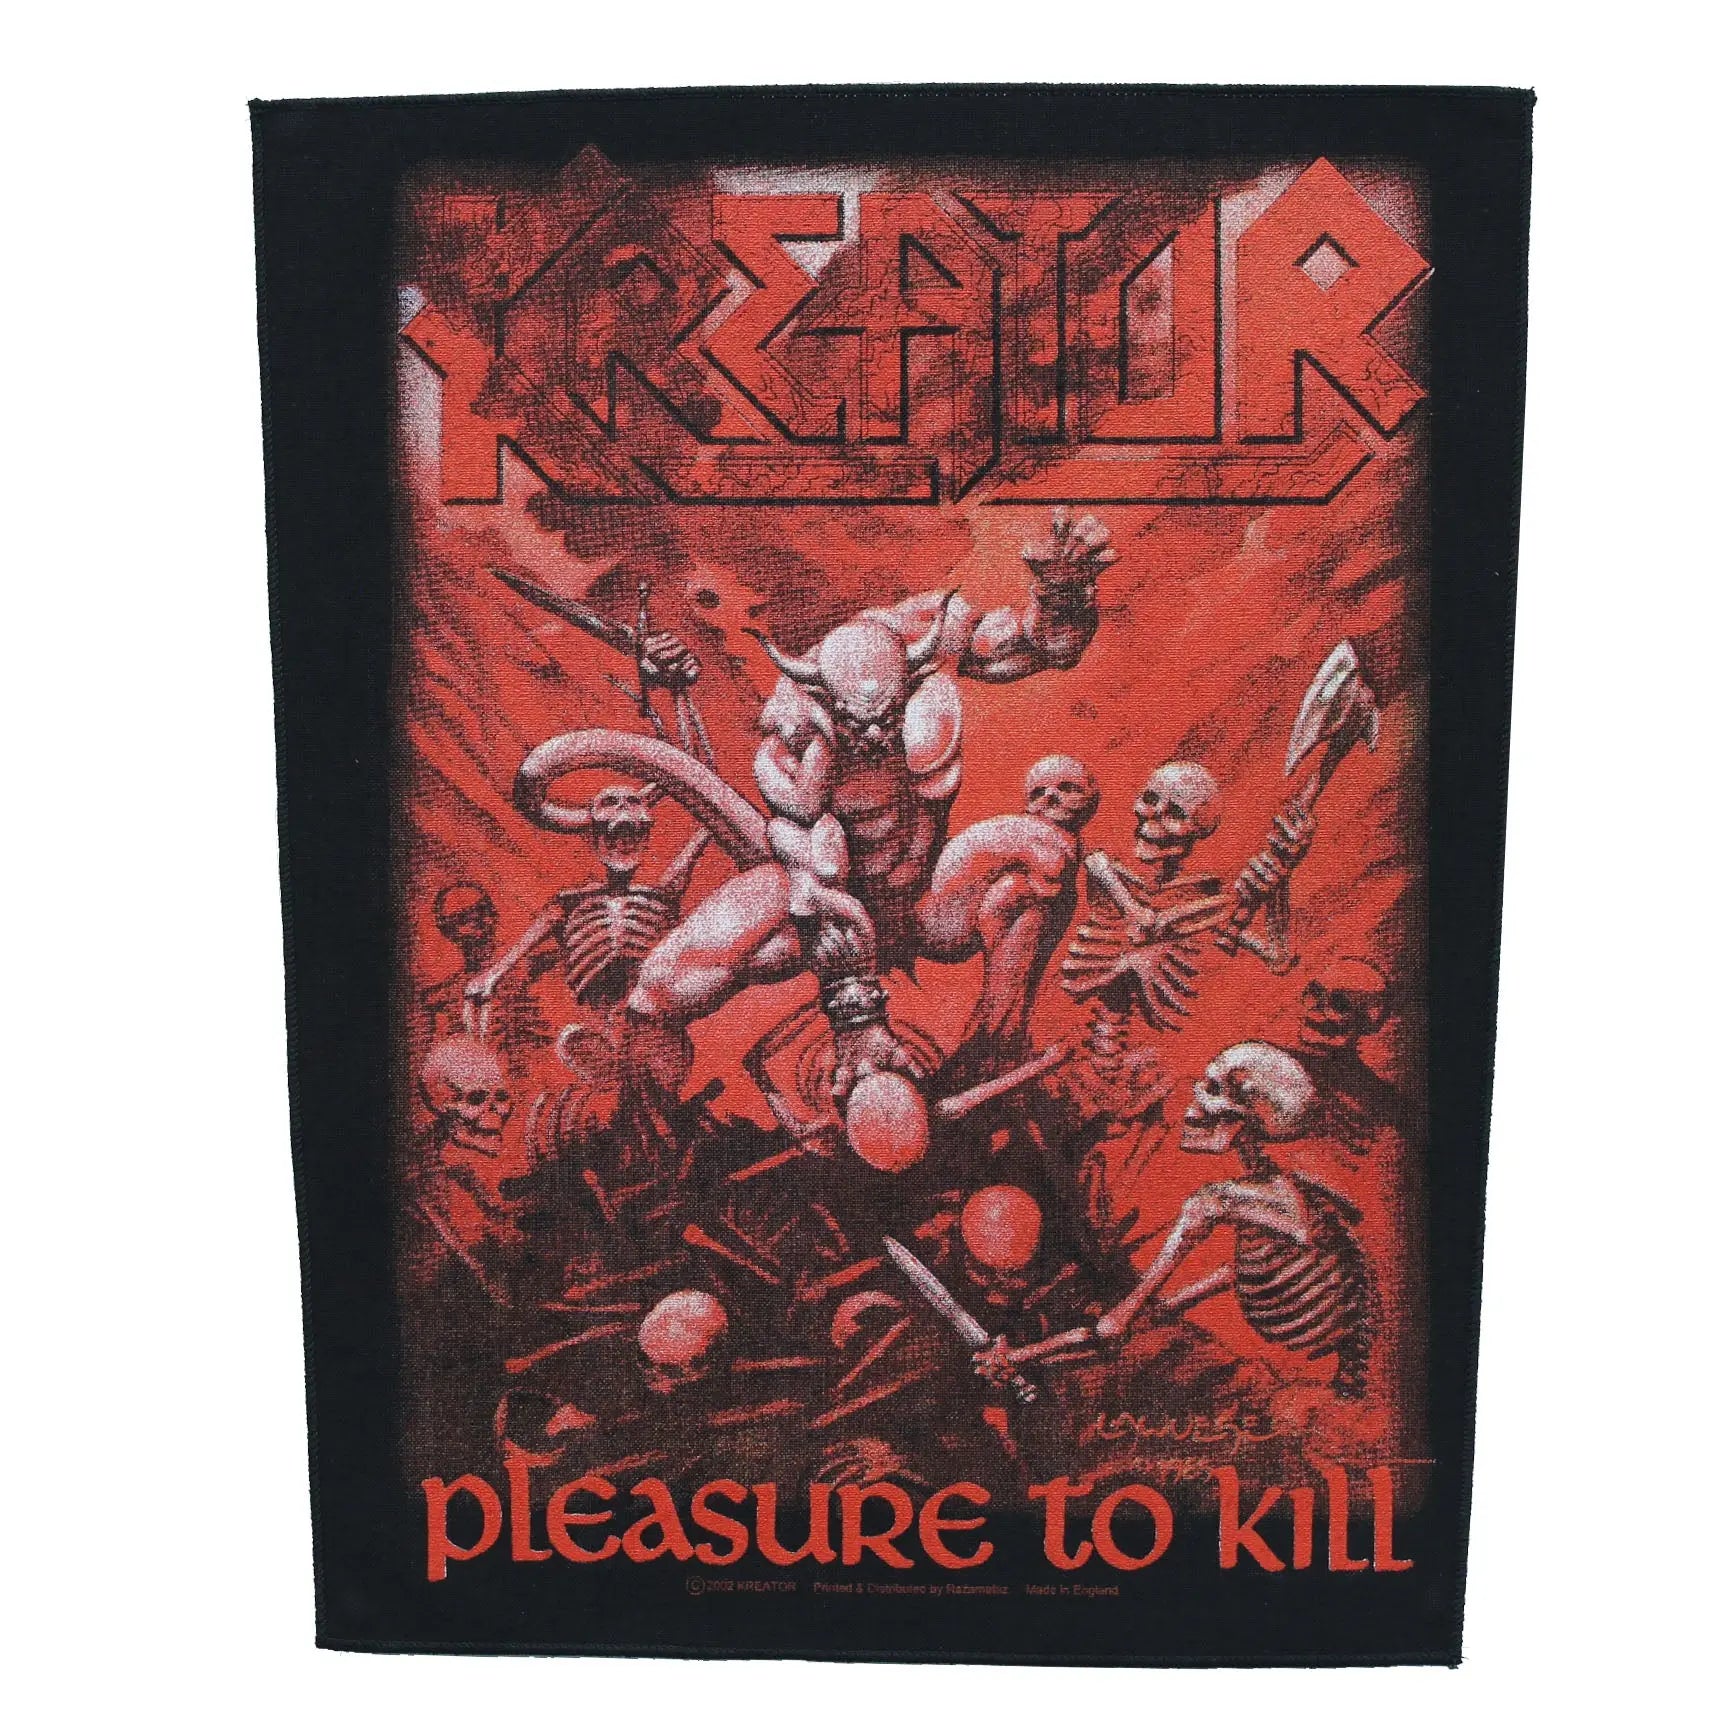 2002 Kreator Pleasure To Kill Woven Sew On Back Patch 